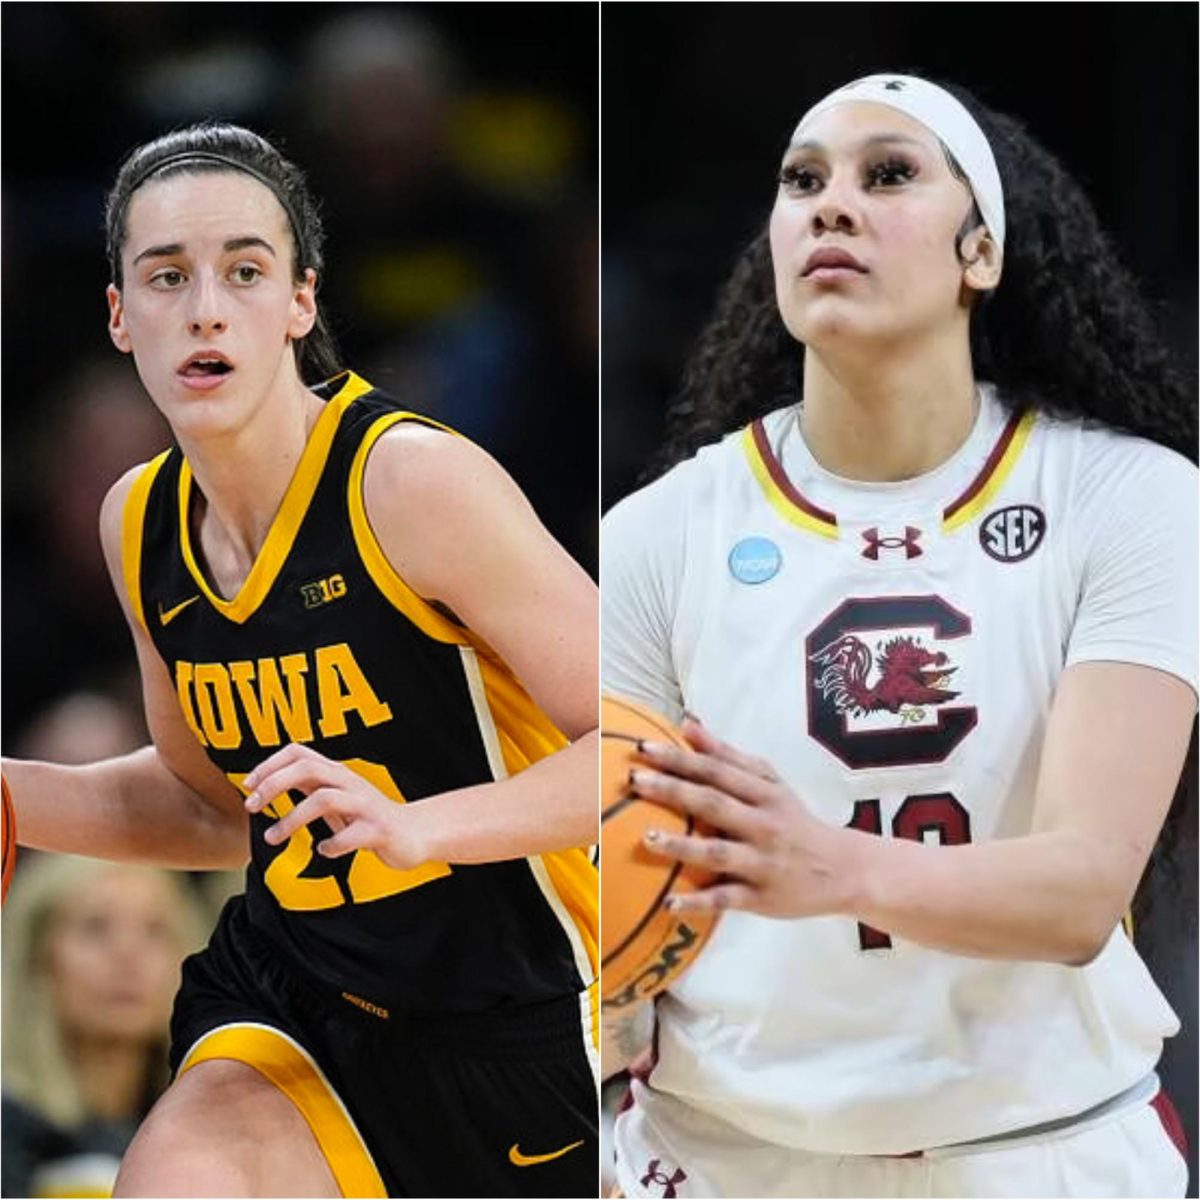 Iowa’s Caitlin Clark and South Carolina’s Kamilla Cardoso faced off in this year’s March Madness championship.